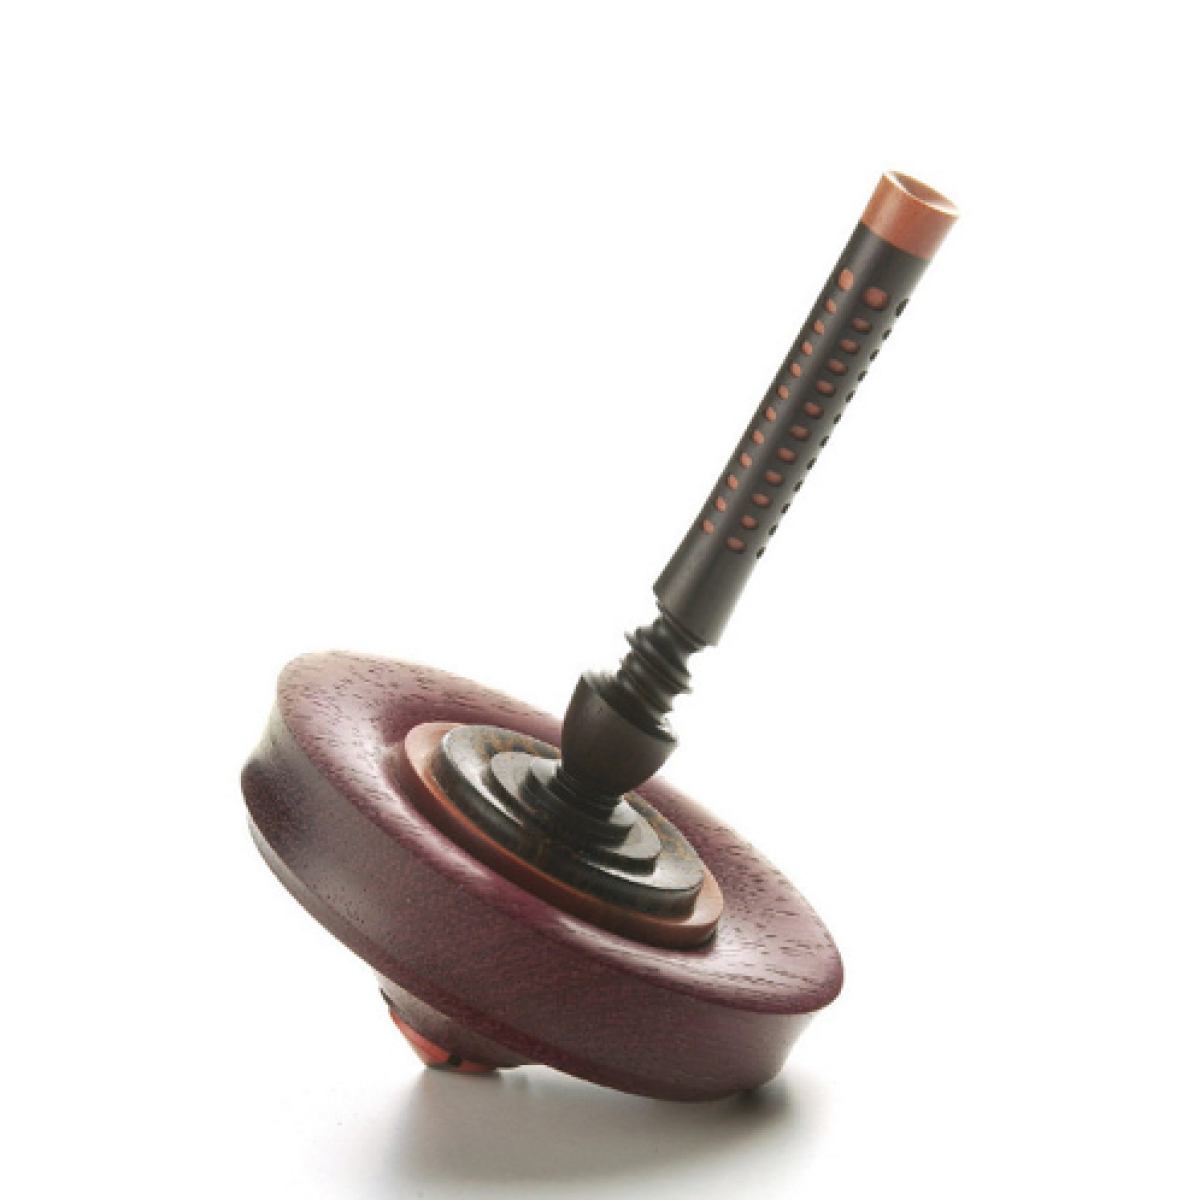 Exclusive Collector's Spinning Top made of Precious Wood with Elaborate Details